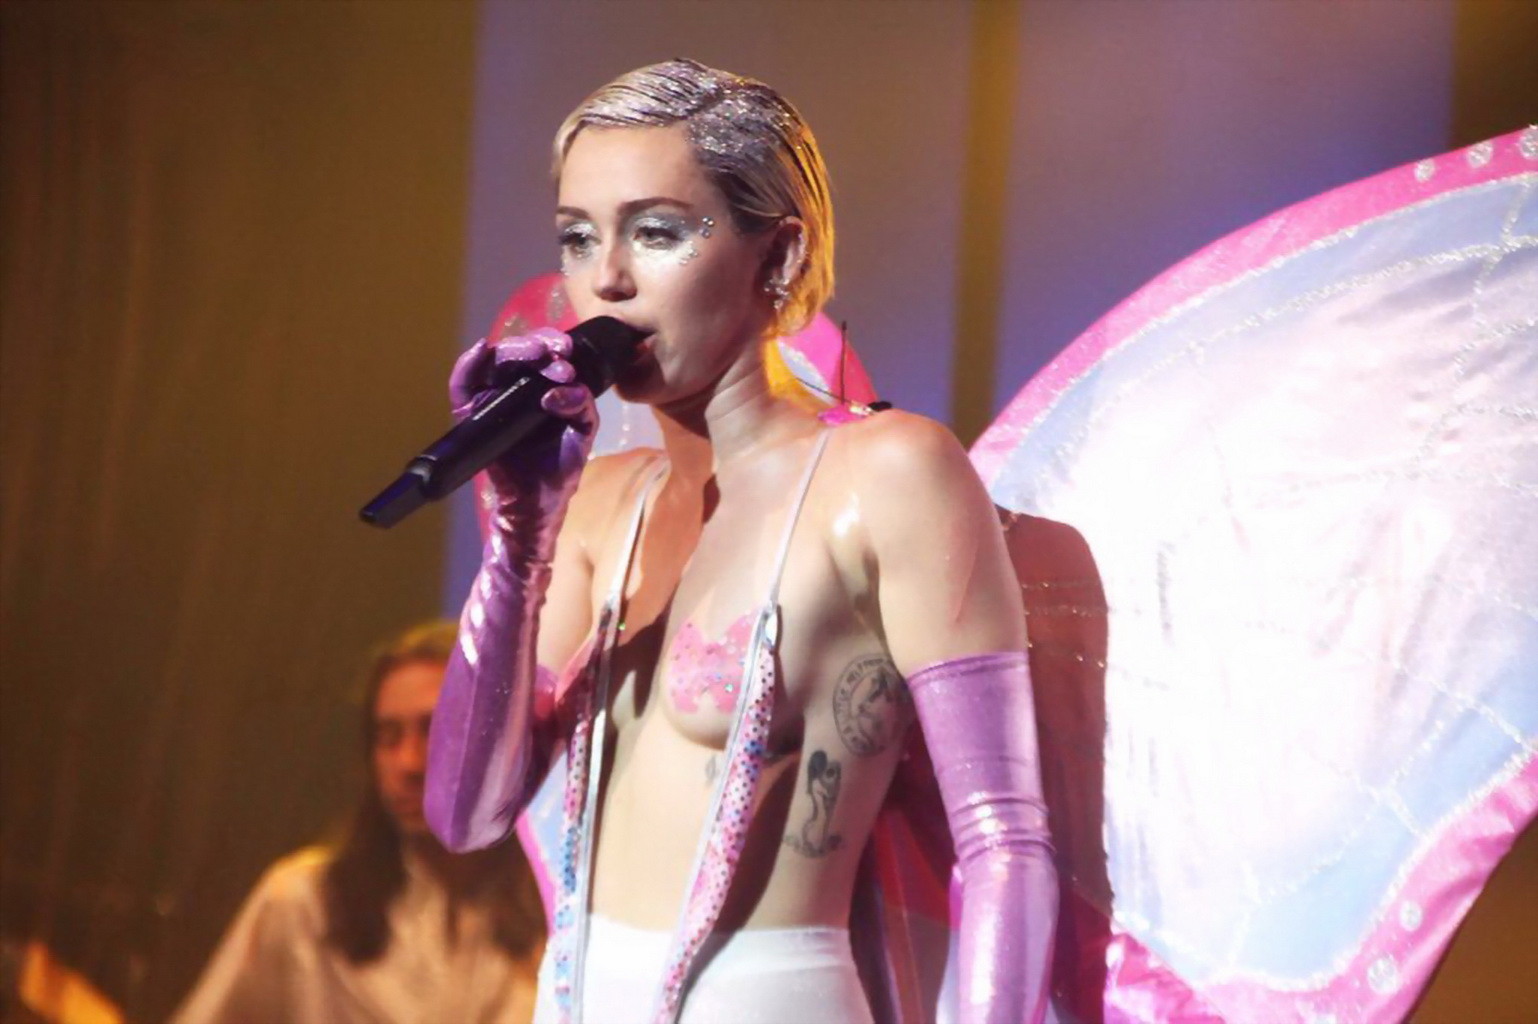 Miley Cyrus topless wearing butterfly pasties and pantyhose while performing at  #75164698